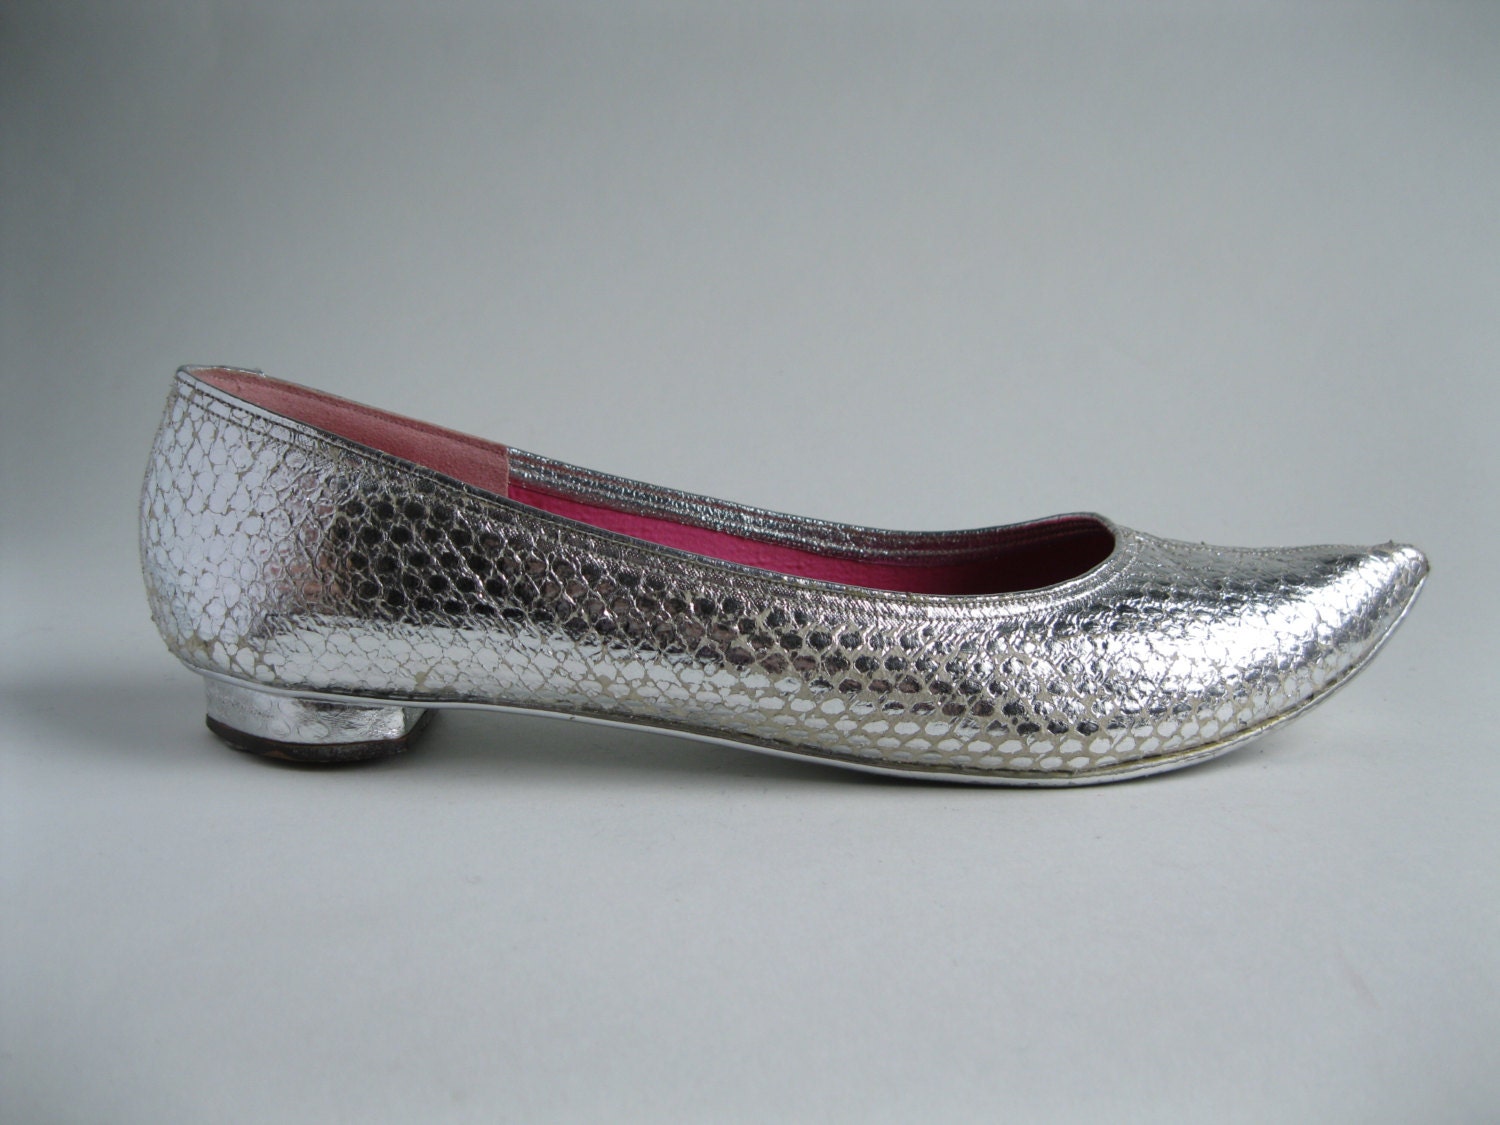 Vintage 1960s Silver Shoes Genie Ballet Flats by unionmadebride